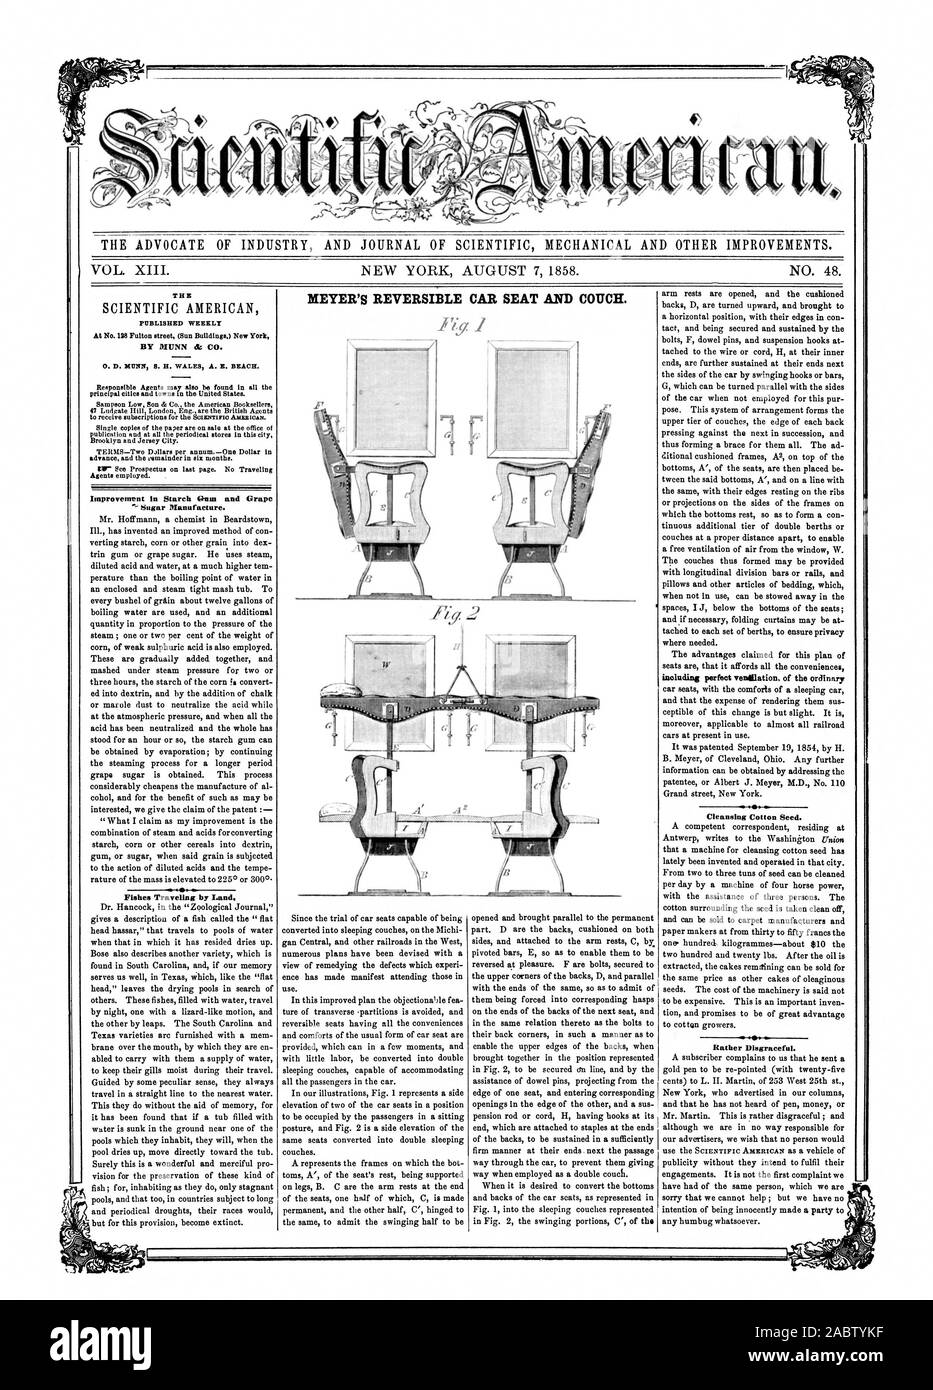 THE ADVOCATE OF INDUSTRY AND JOURNAL OF SCIENTIFIC MECHANICAL AND OTHER IMPROVEMENTS. MEYER'S REVERSIBLE CAR SEAT AND COUCH. fig Improvement In Starch 6Inm and Grape  Sugar Manufacture. Fishes Traveling by Land. including perfect ventilation. of the ordinary Cleansing Cotton Seed. Rather Disgraceful., scientific american, 1858-08-07 Stock Photo